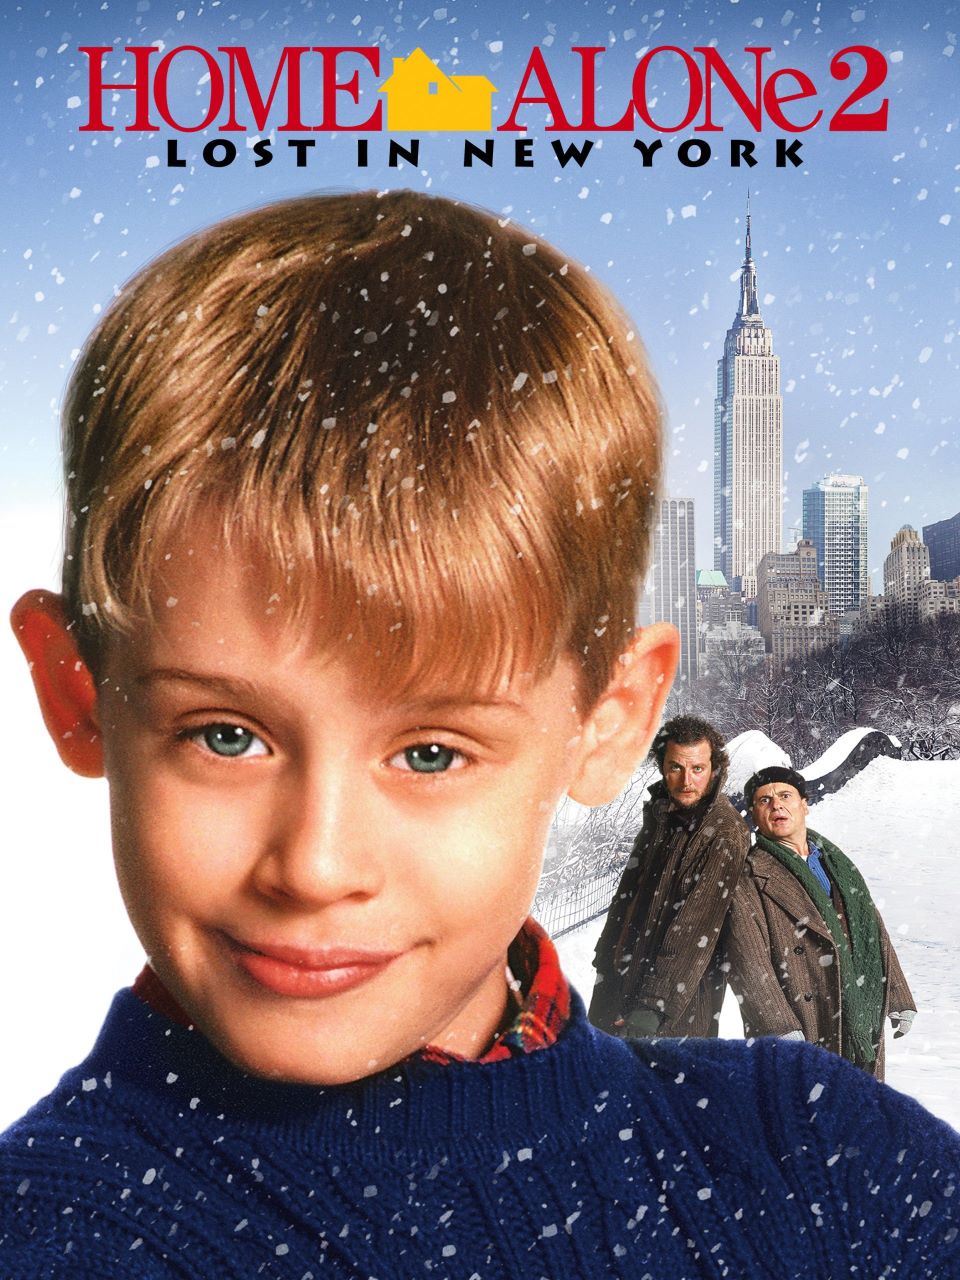 home alone lost in new york tour